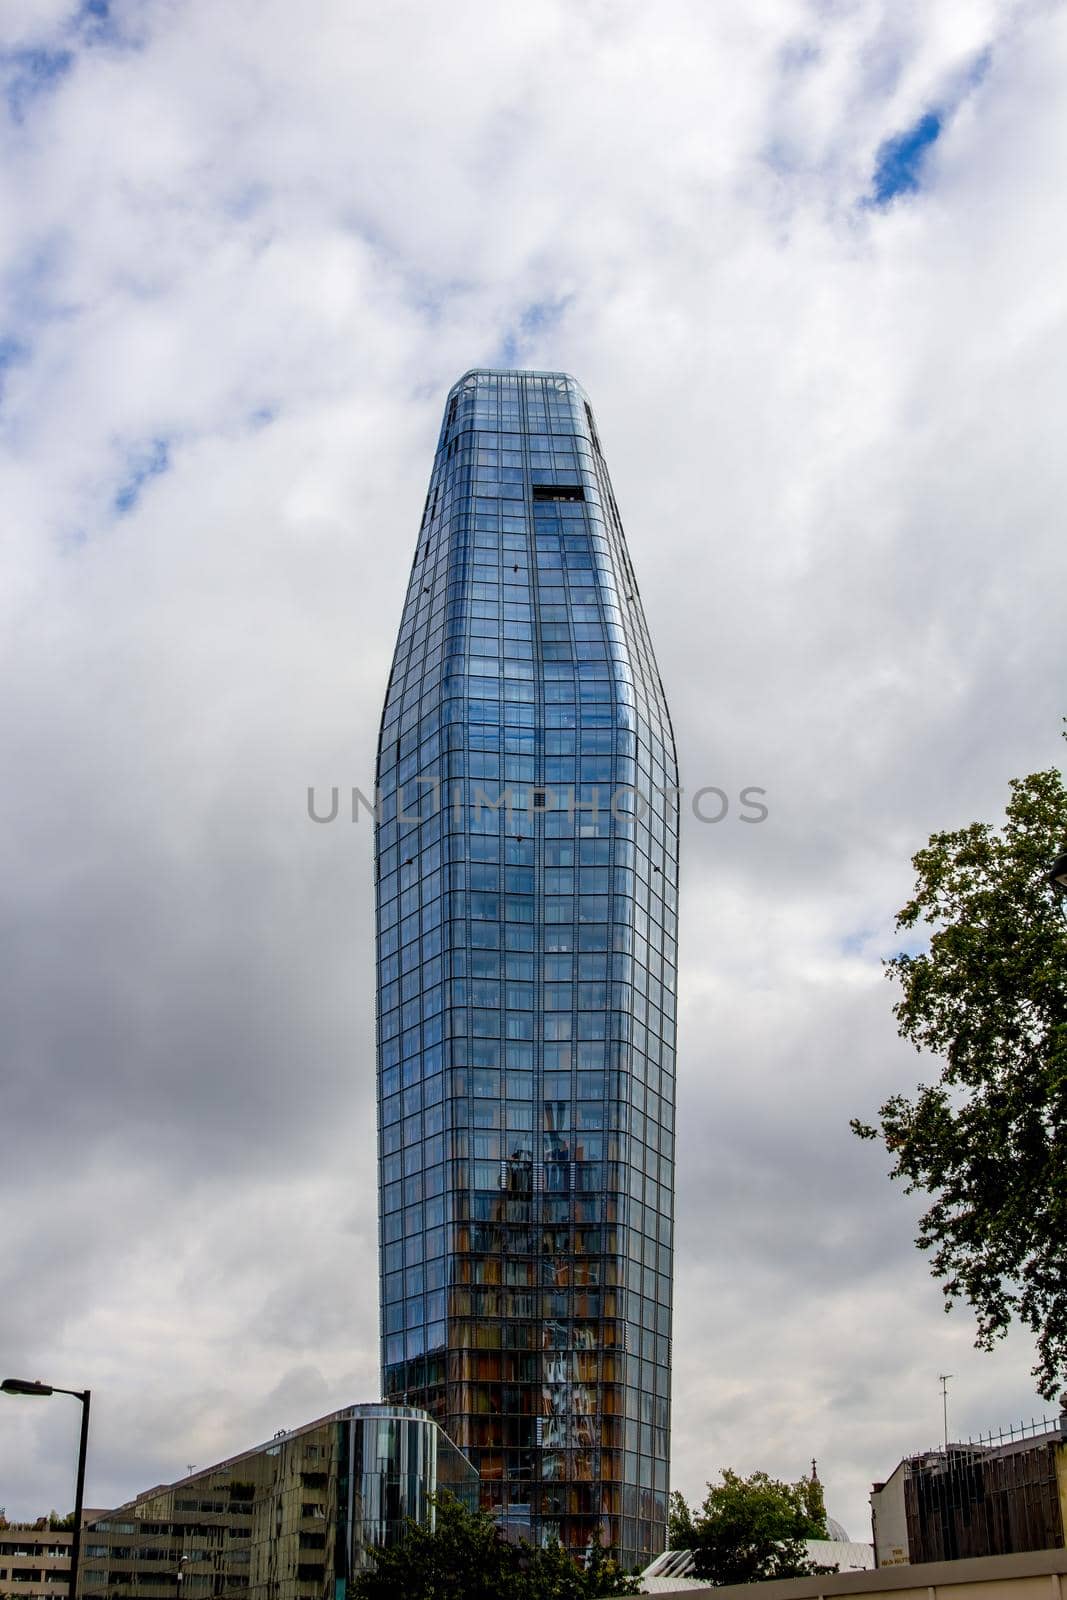 London, England - July 24 2020: One Blackfriars, a mixed-use 50 storey skyscraper, also known as The Boomerang or The Vase